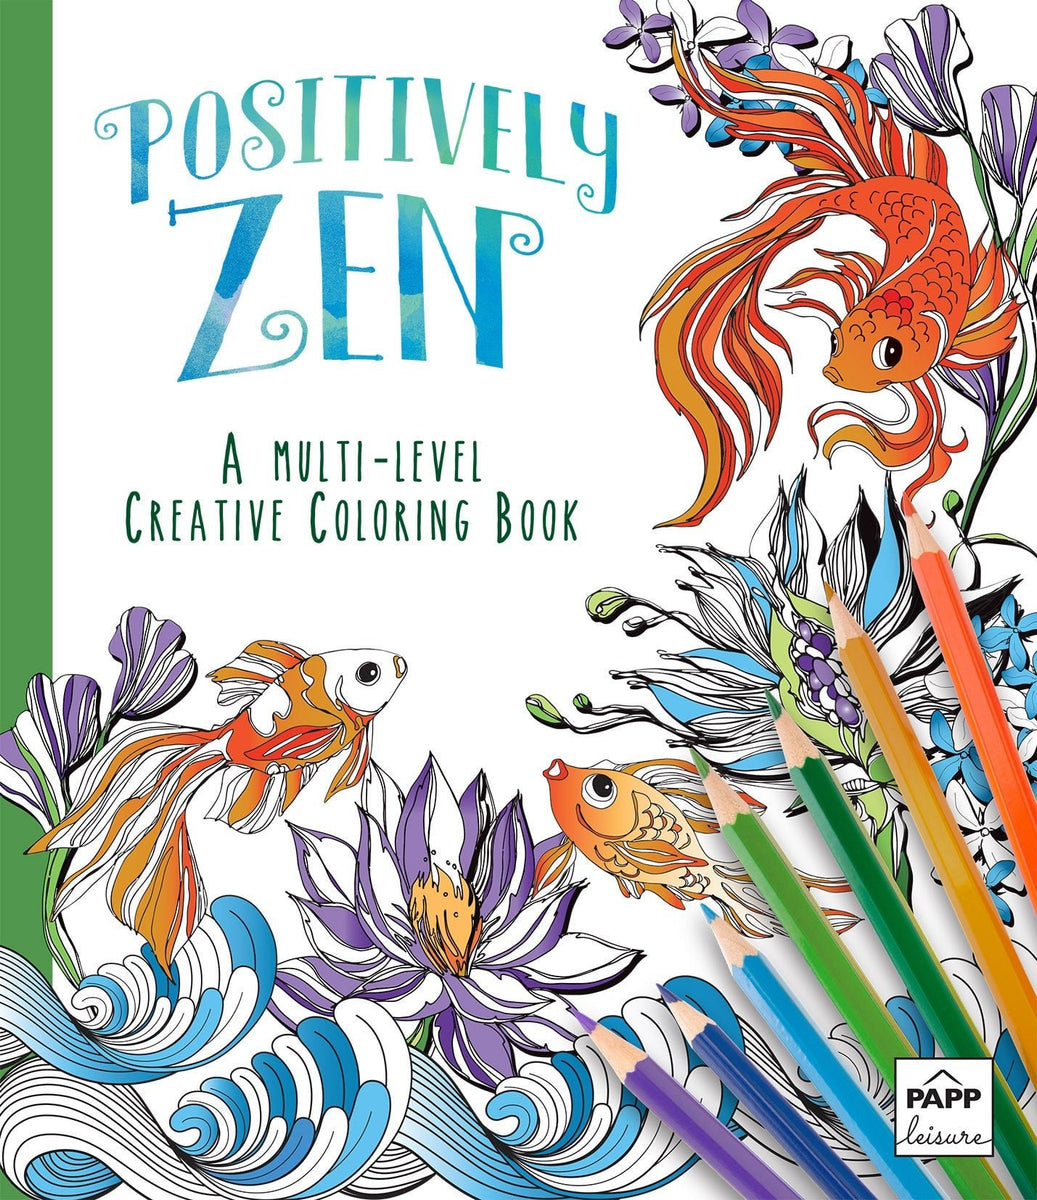 http://coloringbookzone.com/cdn/shop/products/positively-zen-a-multi-level-creative-coloring-book-577174_1200x1200.jpg?v=1669824273